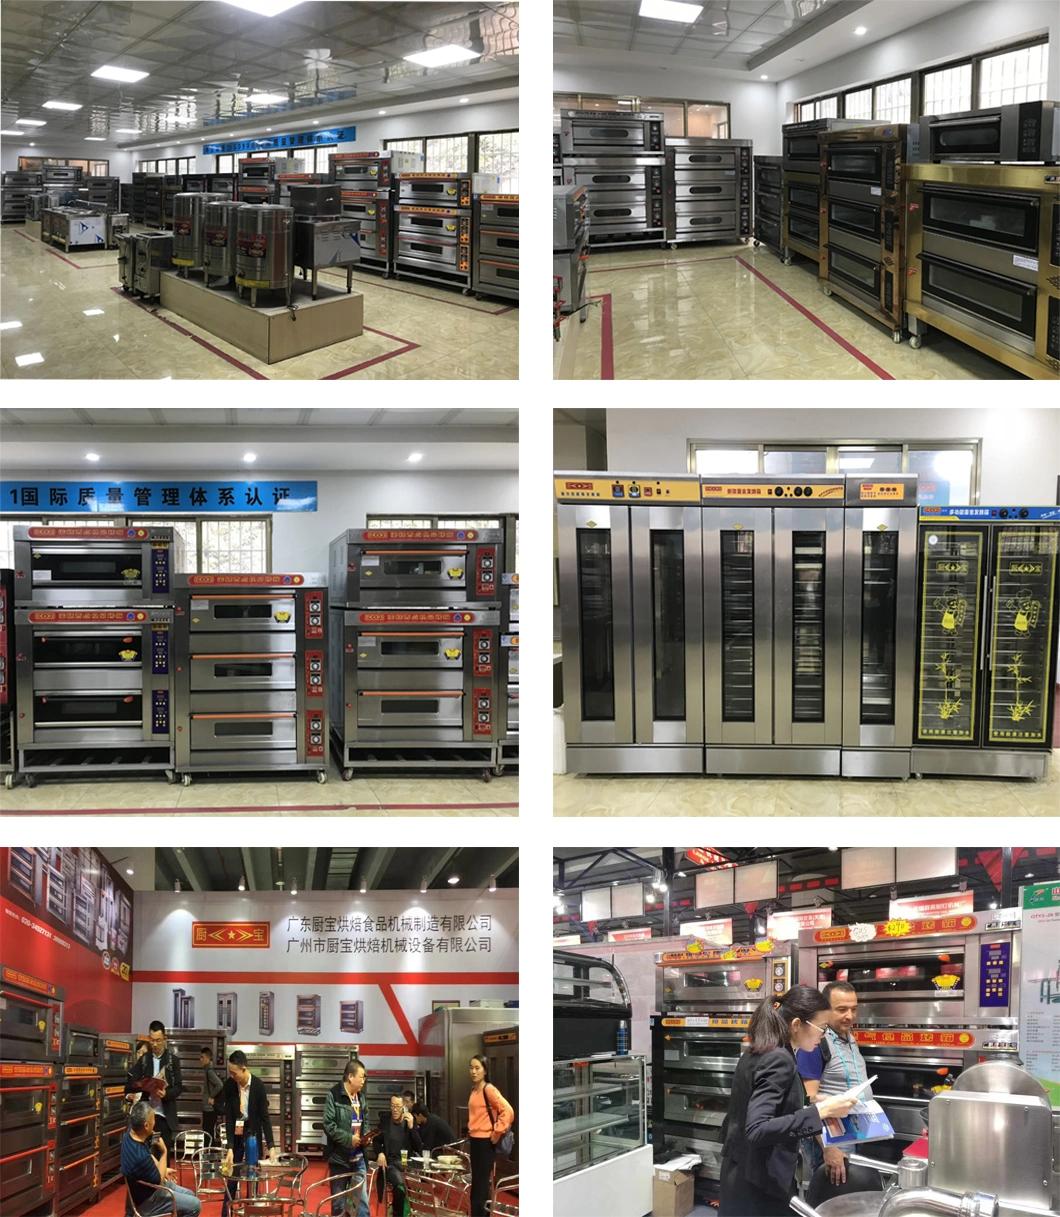 Commercial Restaurant Kitchen 3 Deck 9 Trays Gas Oven for Baking Equipment Bakery Machine Food Machinery